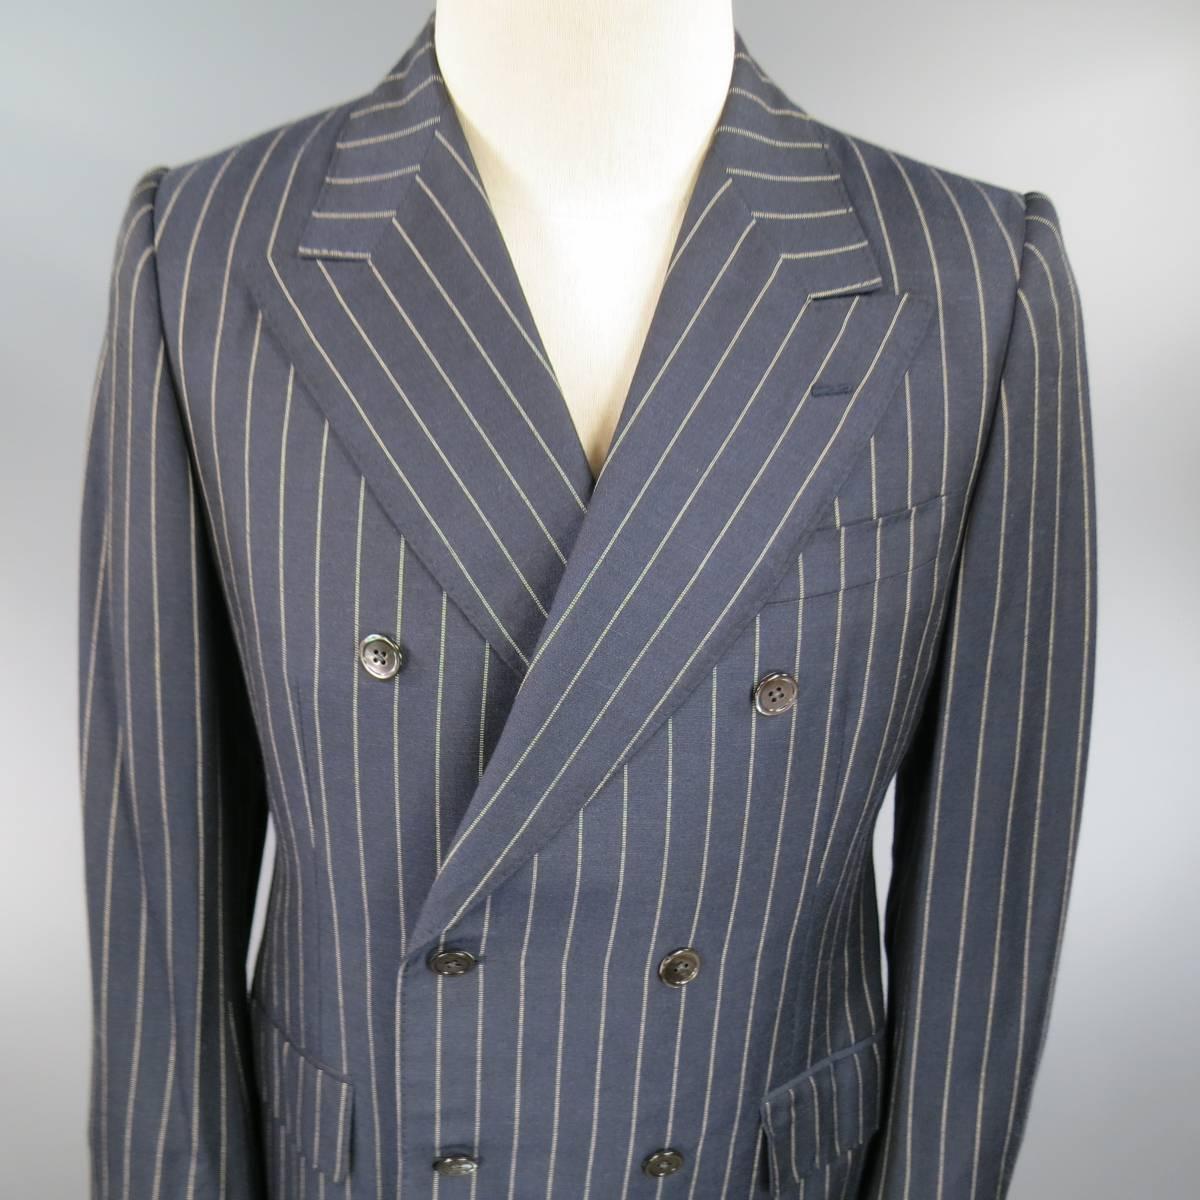 Classic chic PRADA sport coat in navy blue and beige pinstripe fabric with a peak lapel, double breasted closure, double flap pockets, tailored silhouette, and double vented back. Made in Italy.
 
Excellent Pre-Owned Condition.
Marked: IT 48 R
